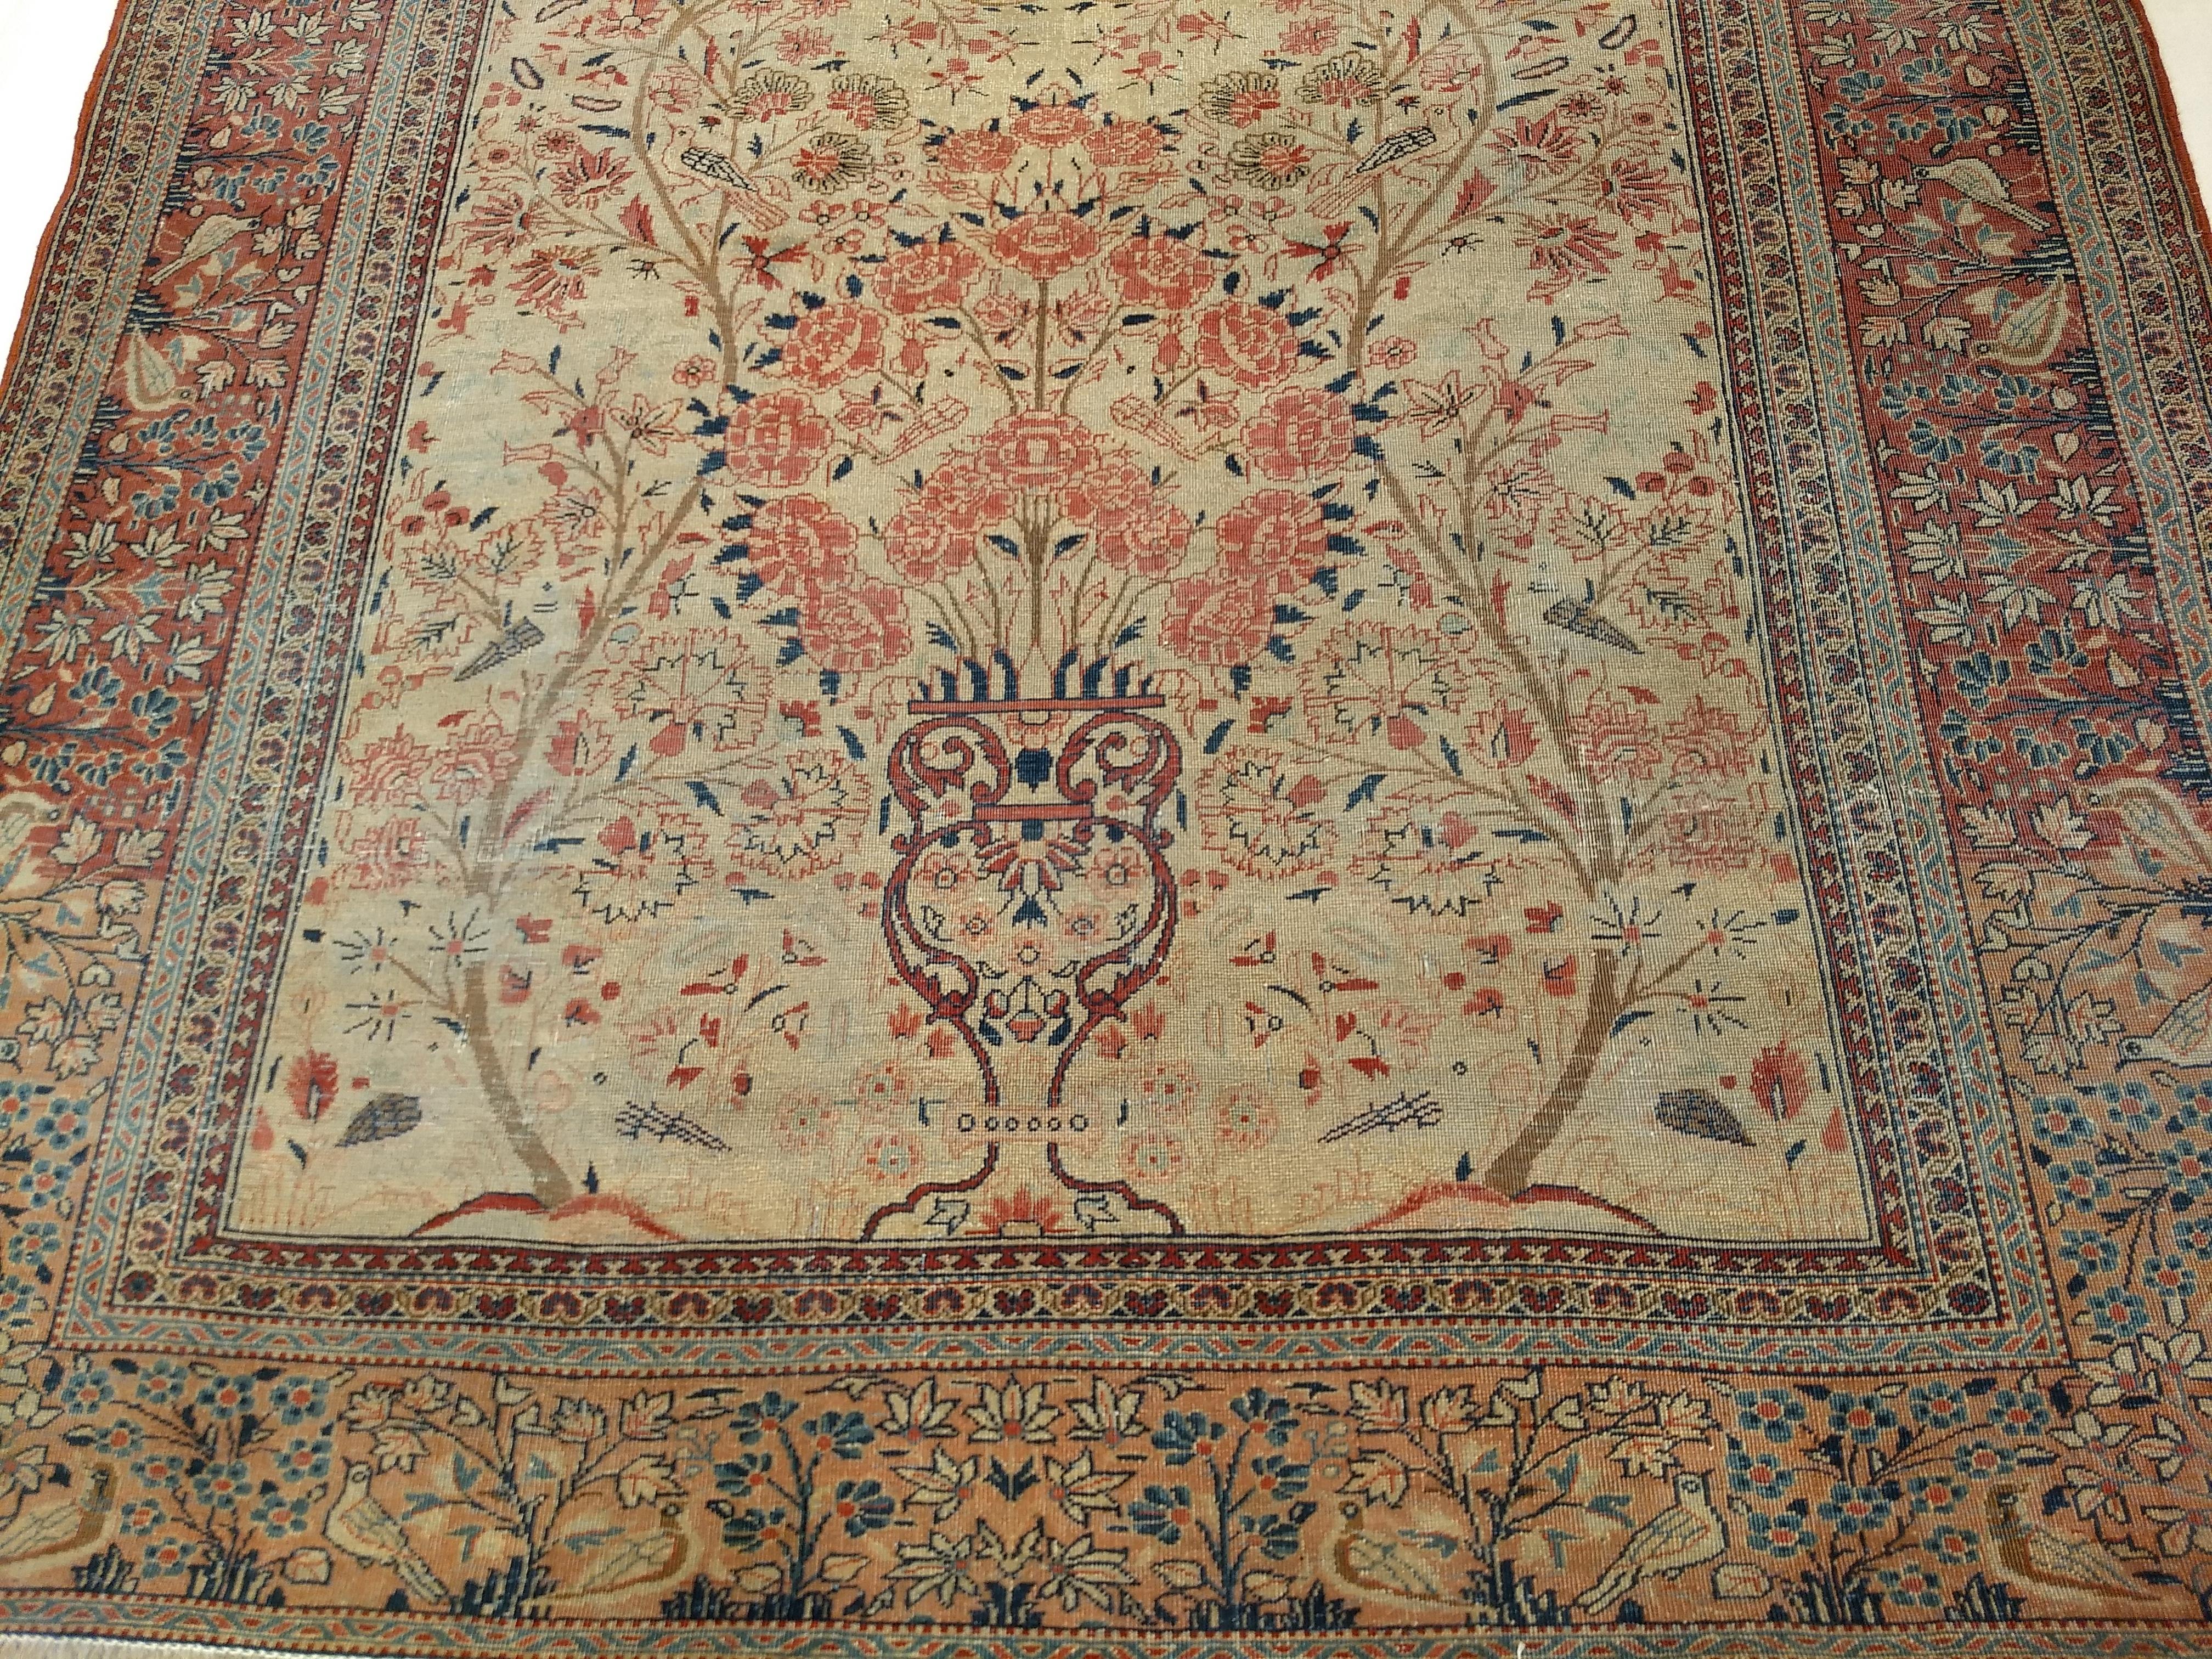 19th Century Persian Kashan “Tree of Life” Vase Rug in Ivory, Brick Red, Navy For Sale 4